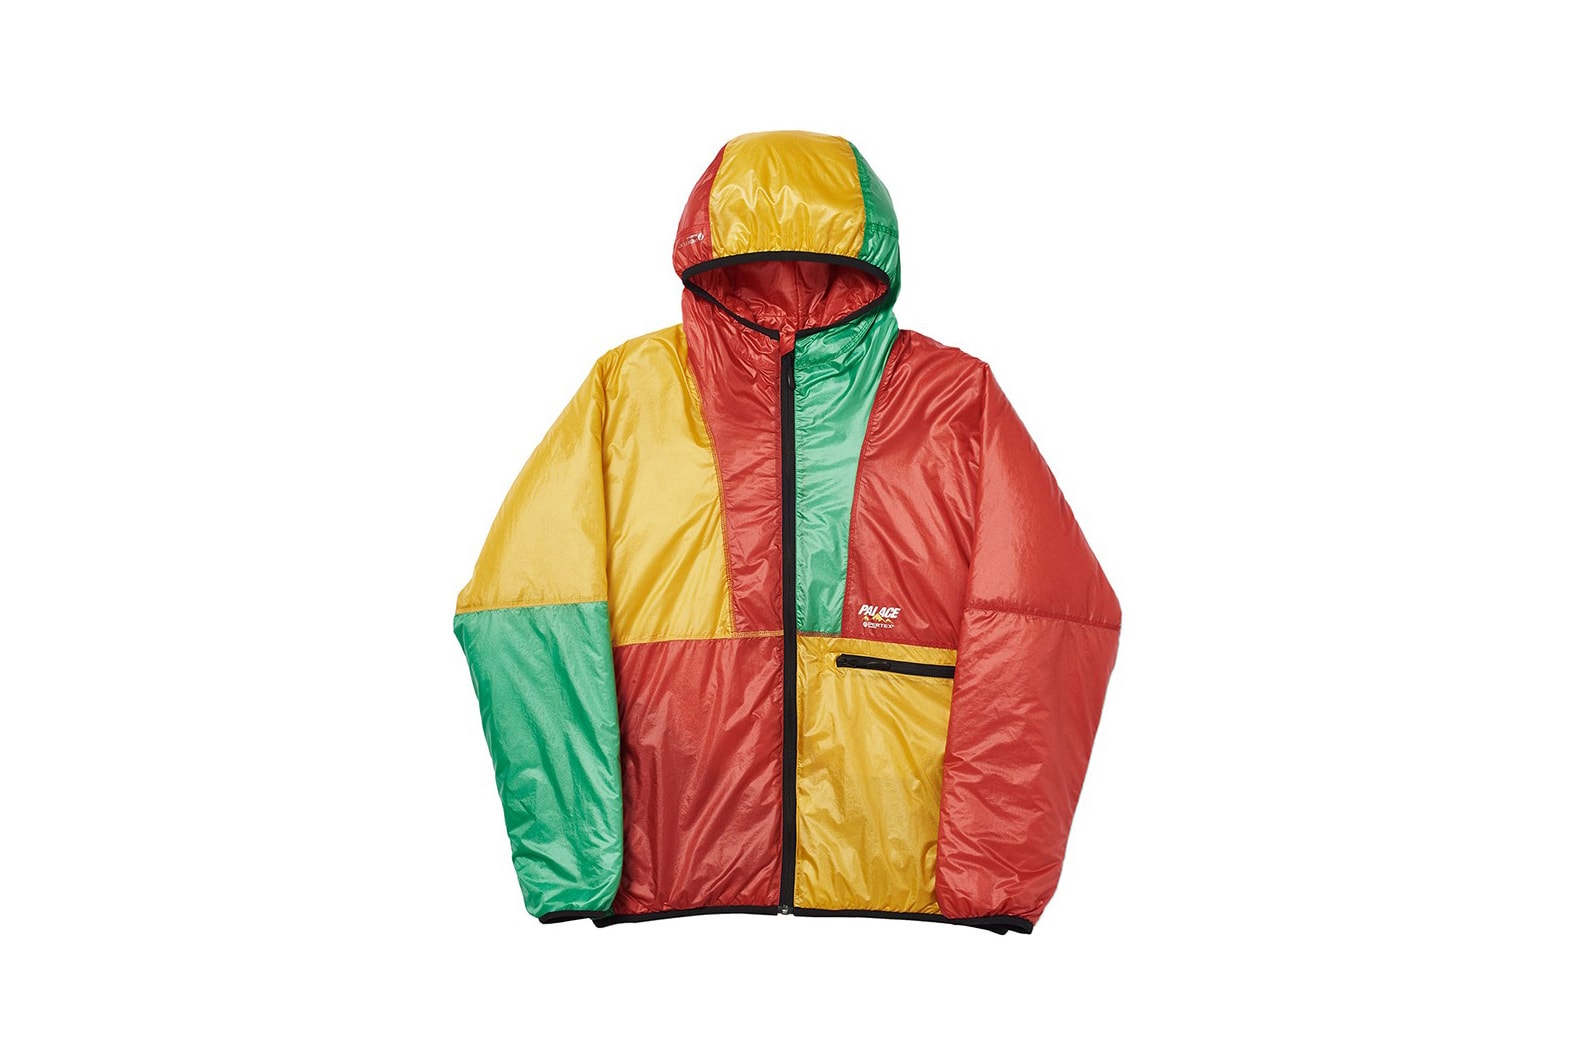 Palace Fall Winter 2019 Collection Jackets